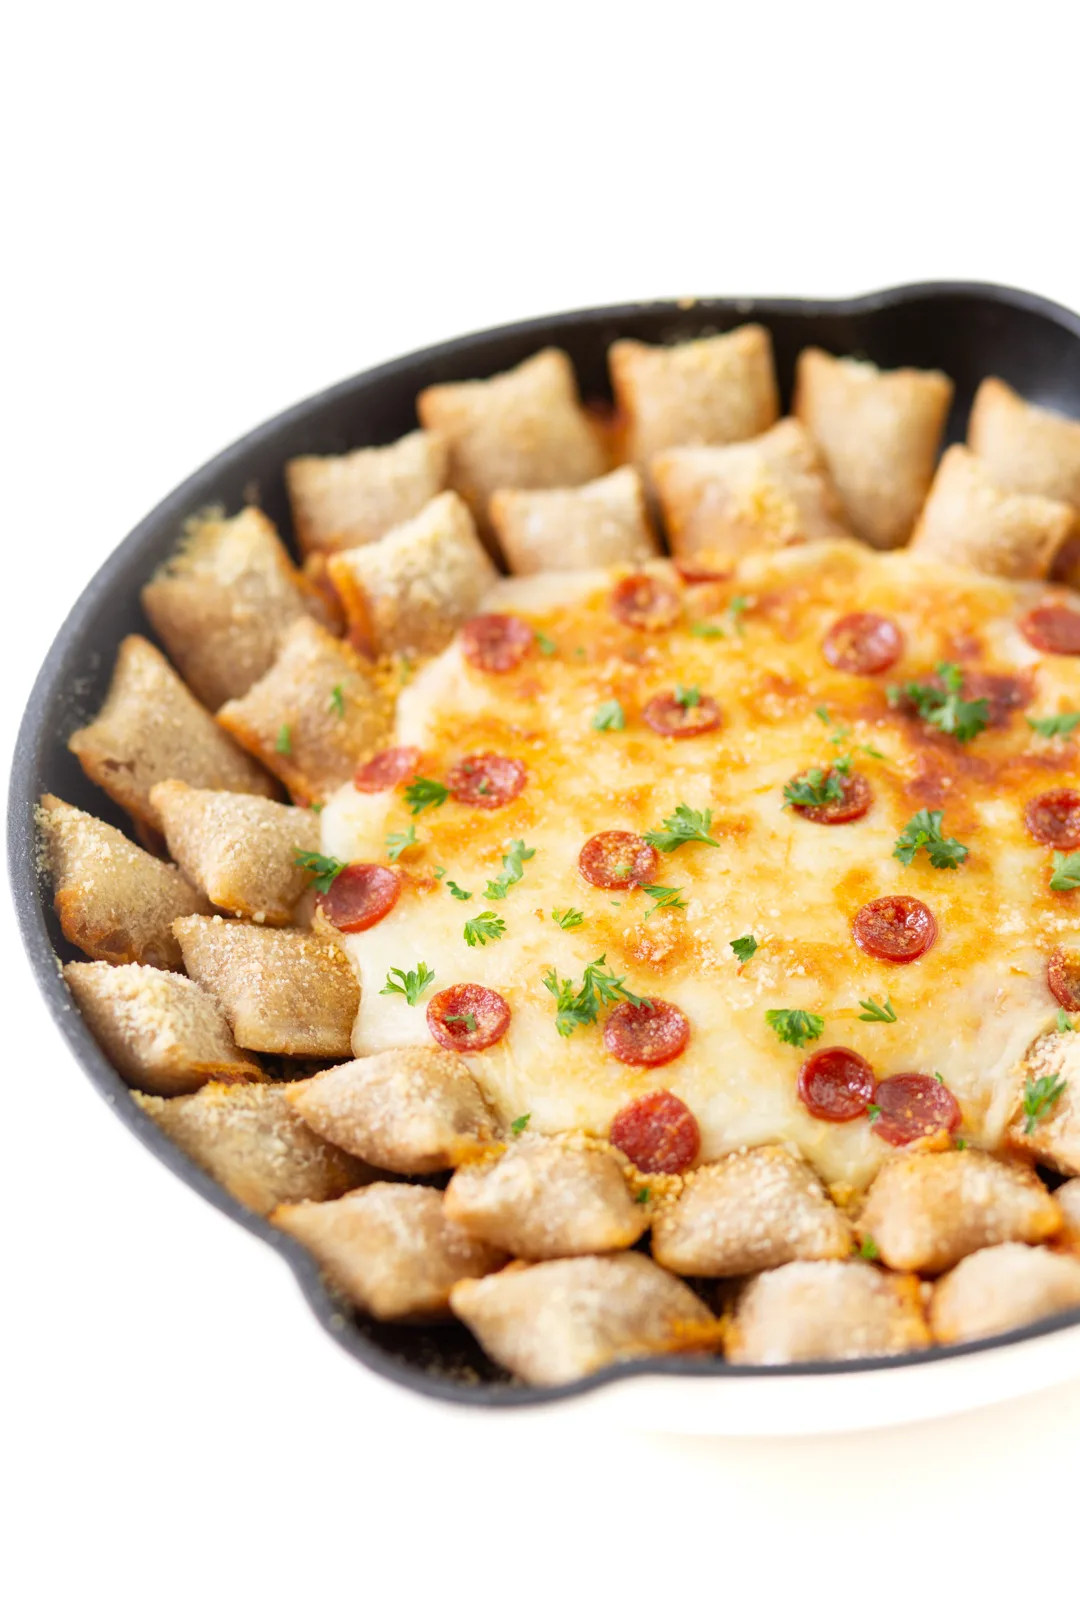 hearty dip made in a skillet with cheese, mini pepperoni and lined with pepperoni pizza rolls. Topped with snippets of parsley for garnish.